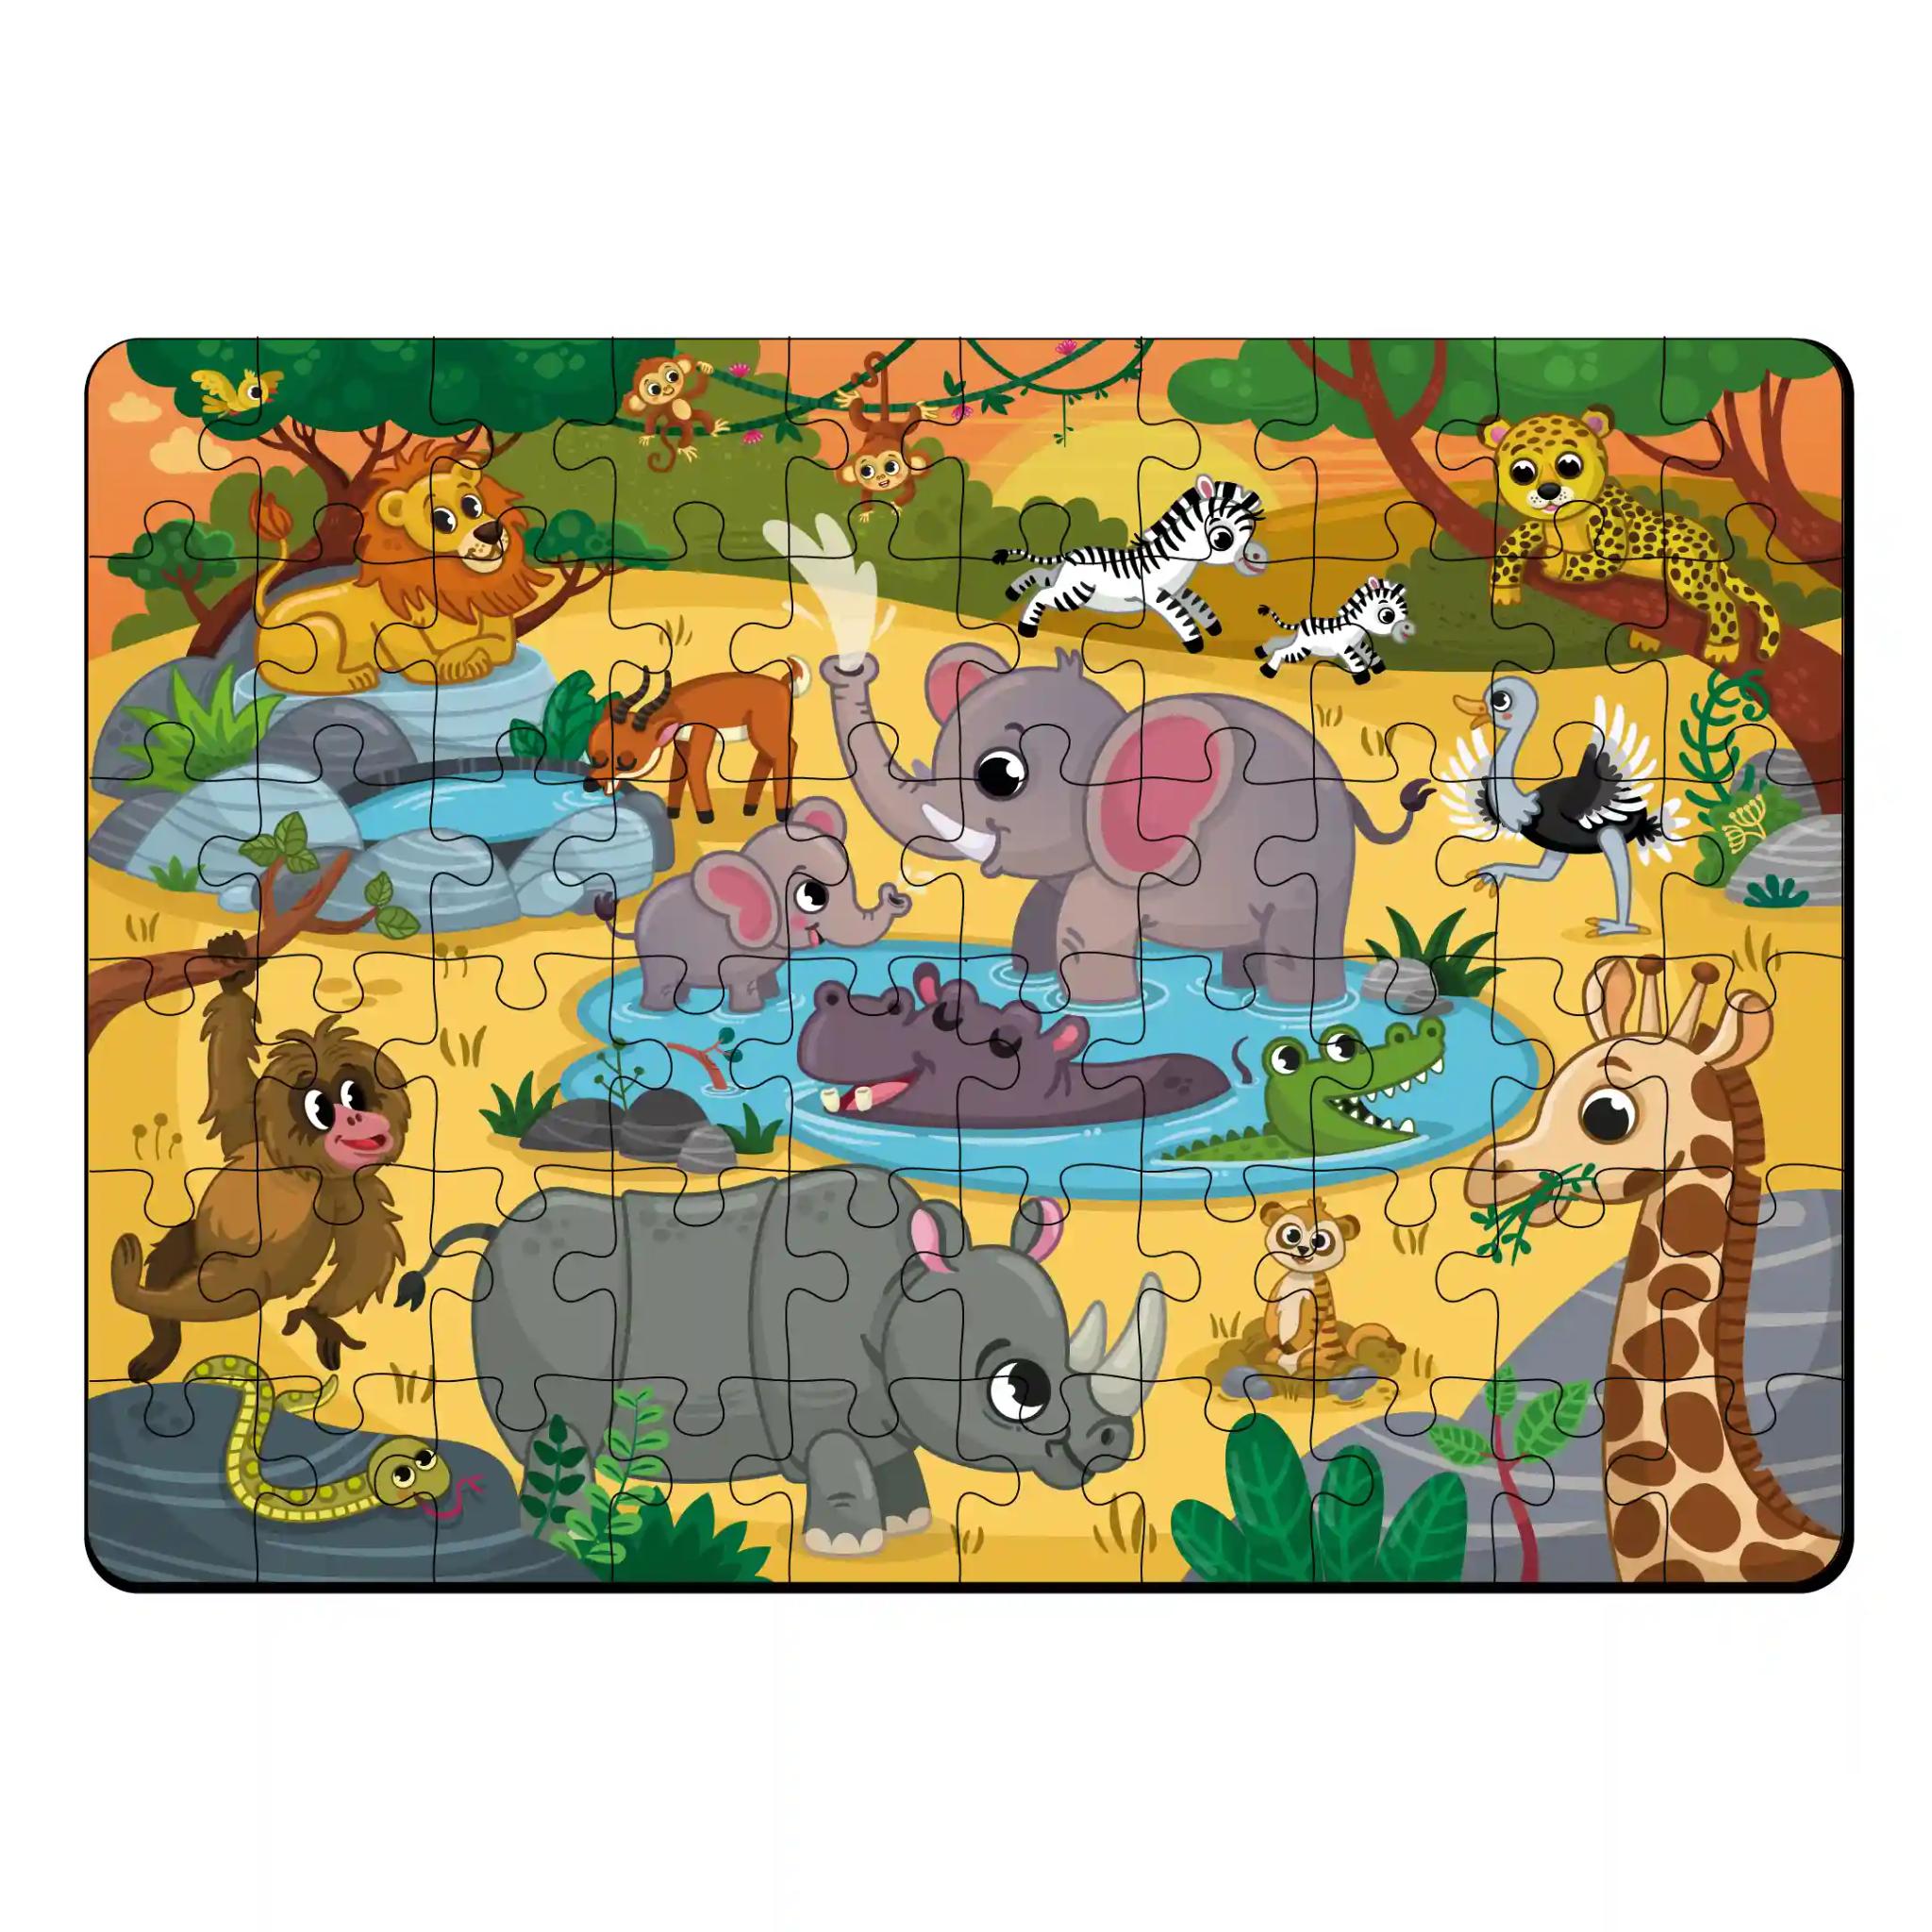 Mini Leaves Wild Safari Animals 60 Pieces Wooden Jigsaw Floor Puzzle with Wooden Box